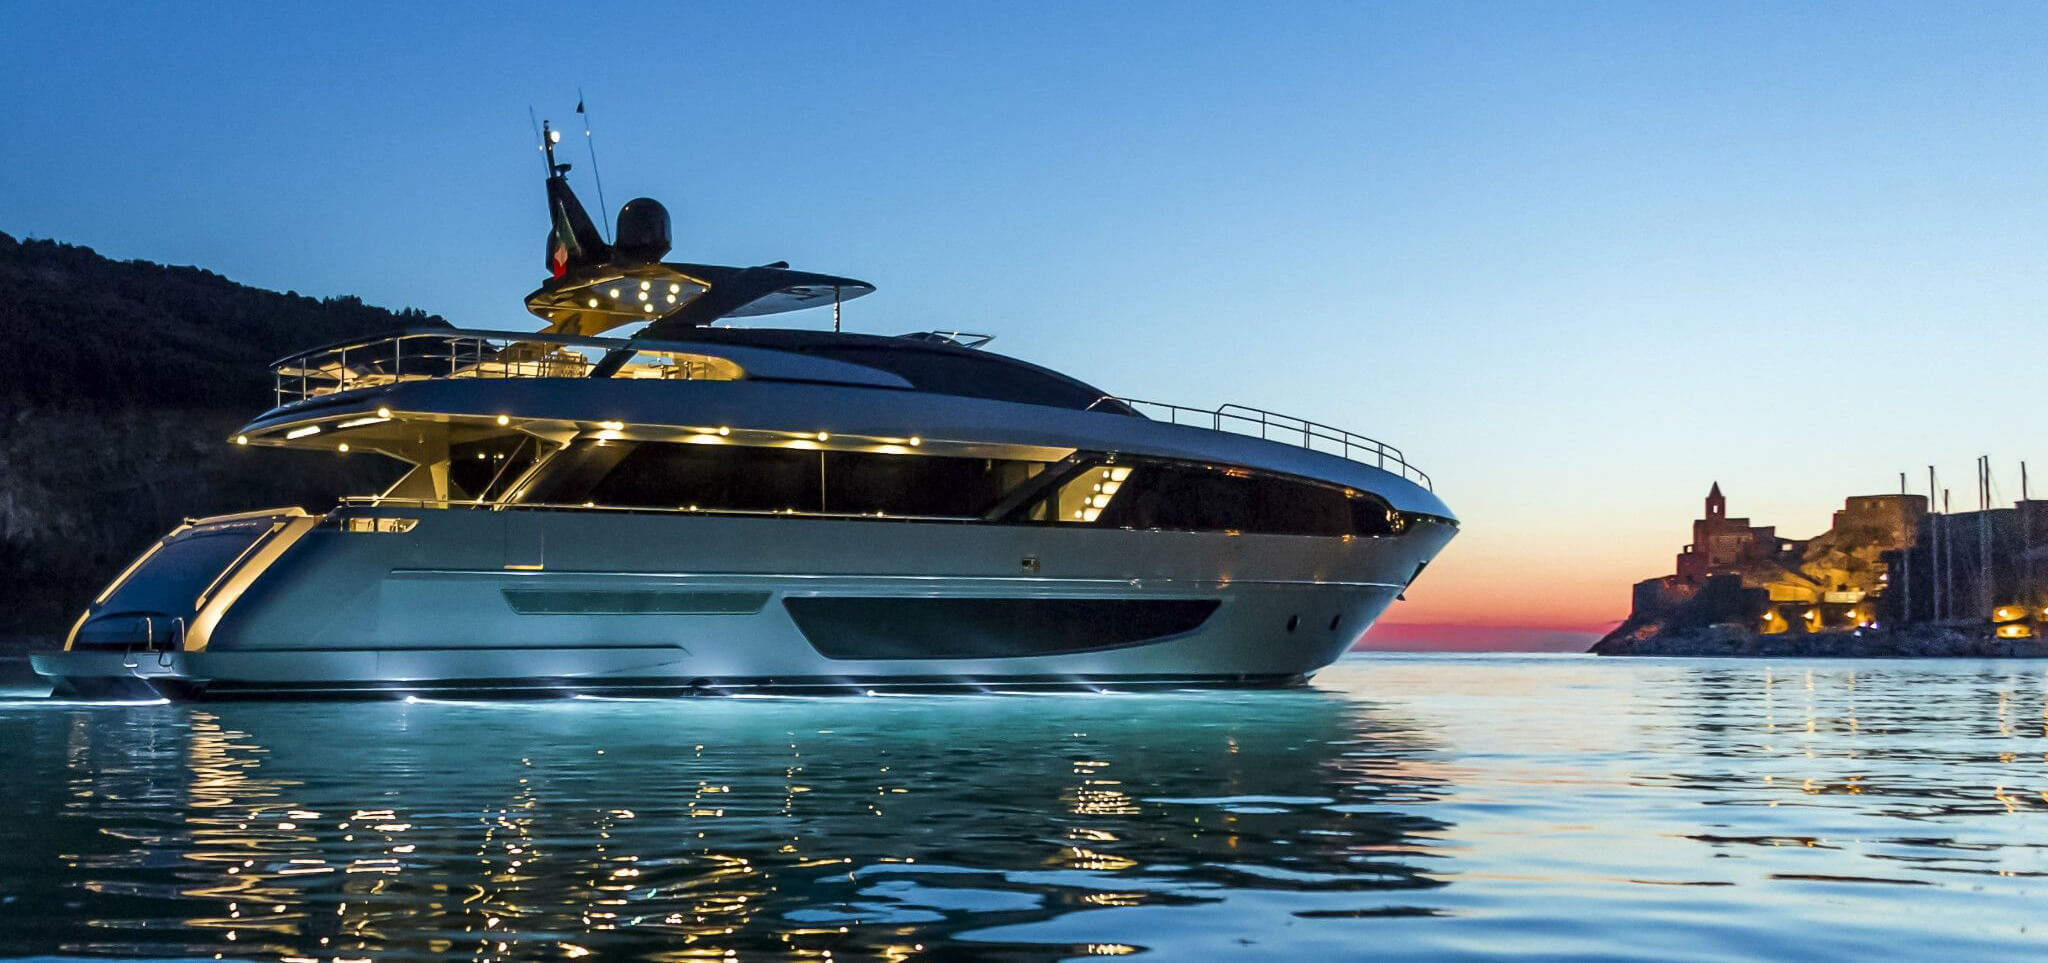 Super yacht in beautiful scenic evening waters